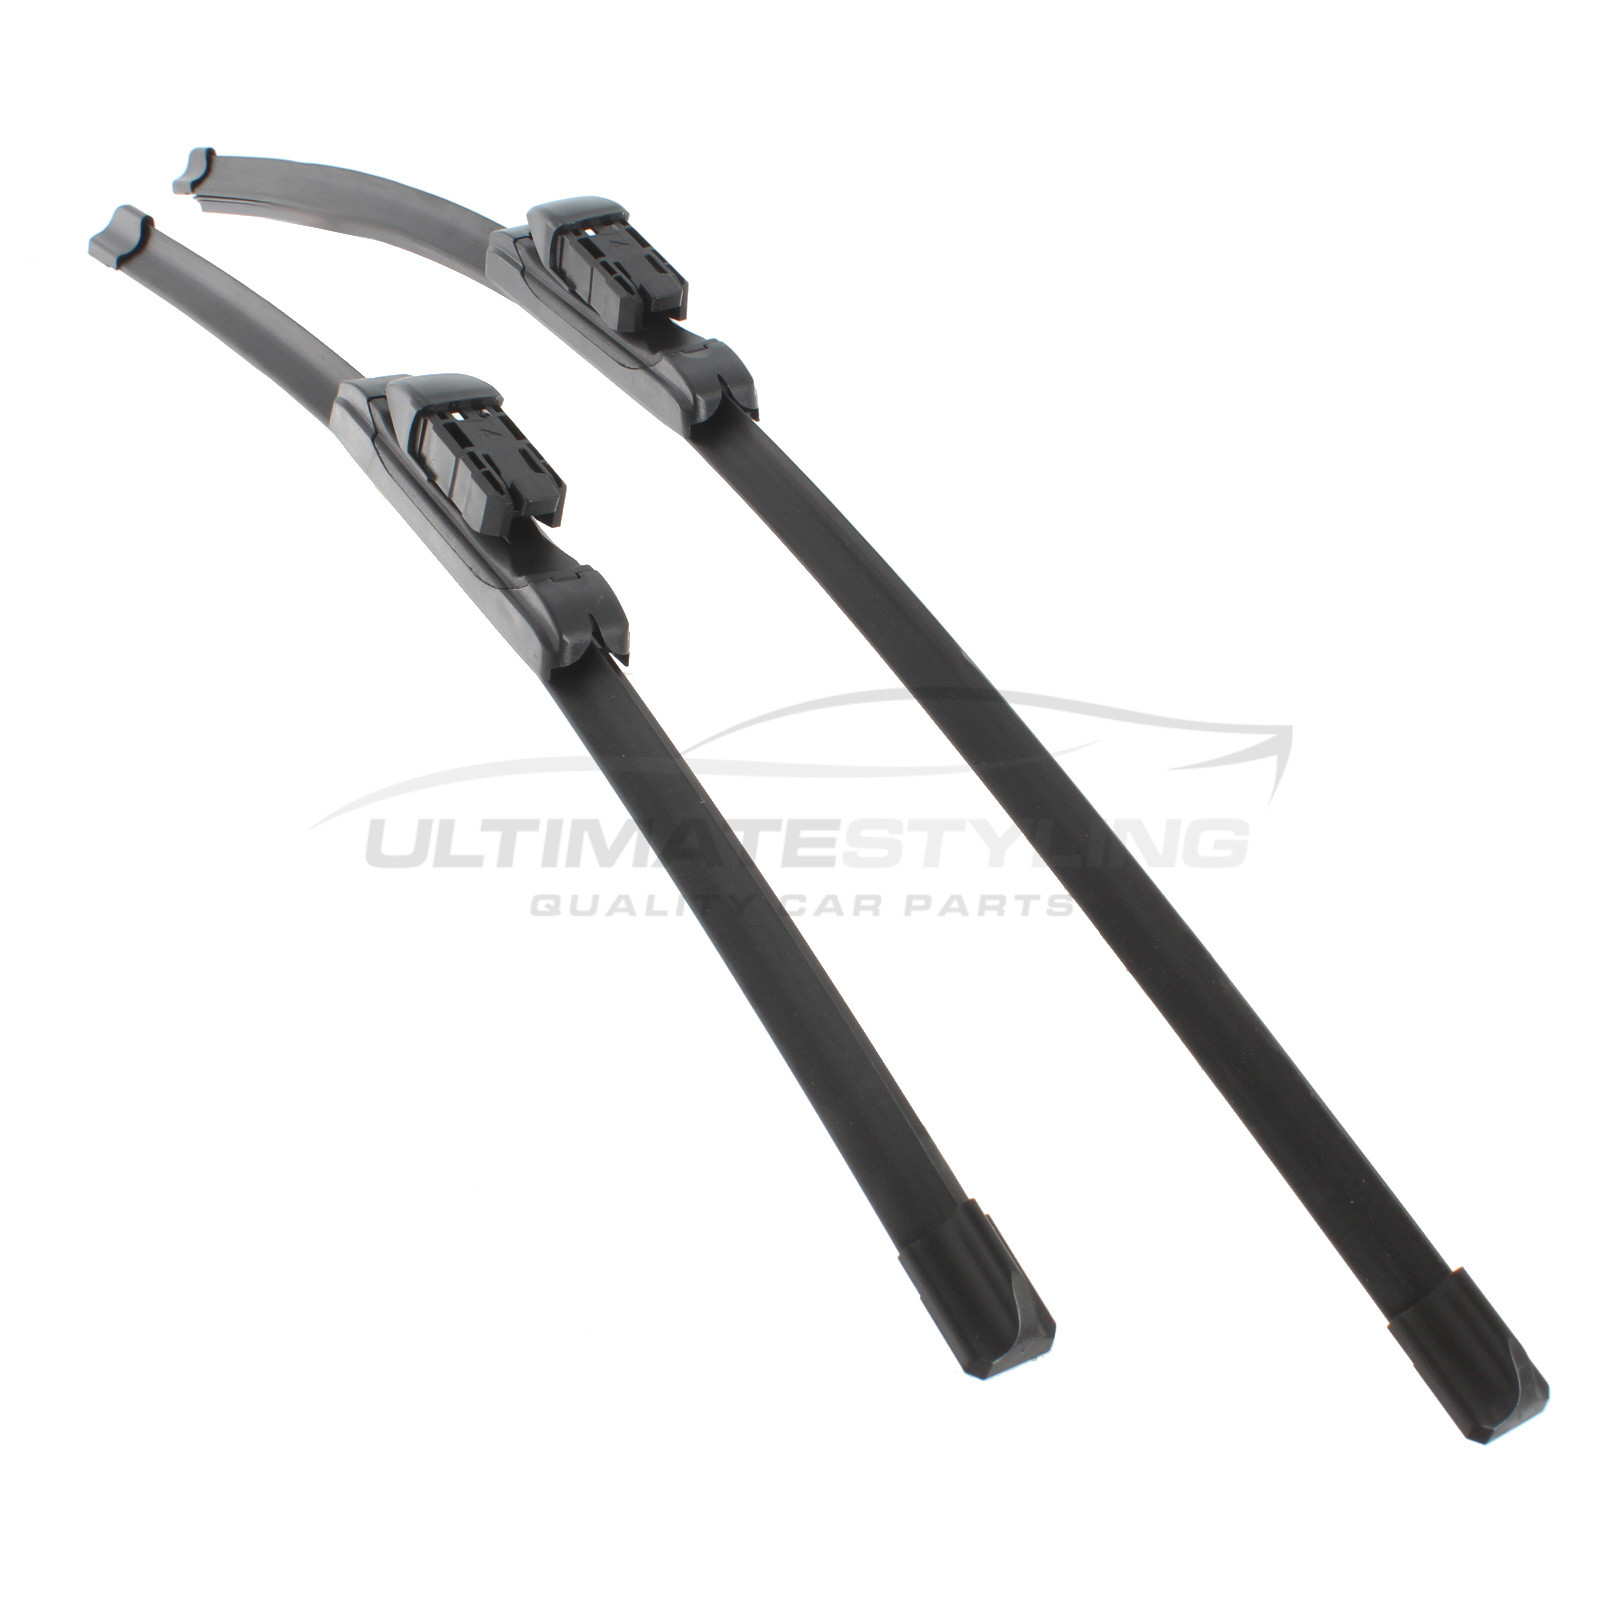 Drivers Side & Passenger Side (Front) Wiper Blades for Vauxhall Grandland X